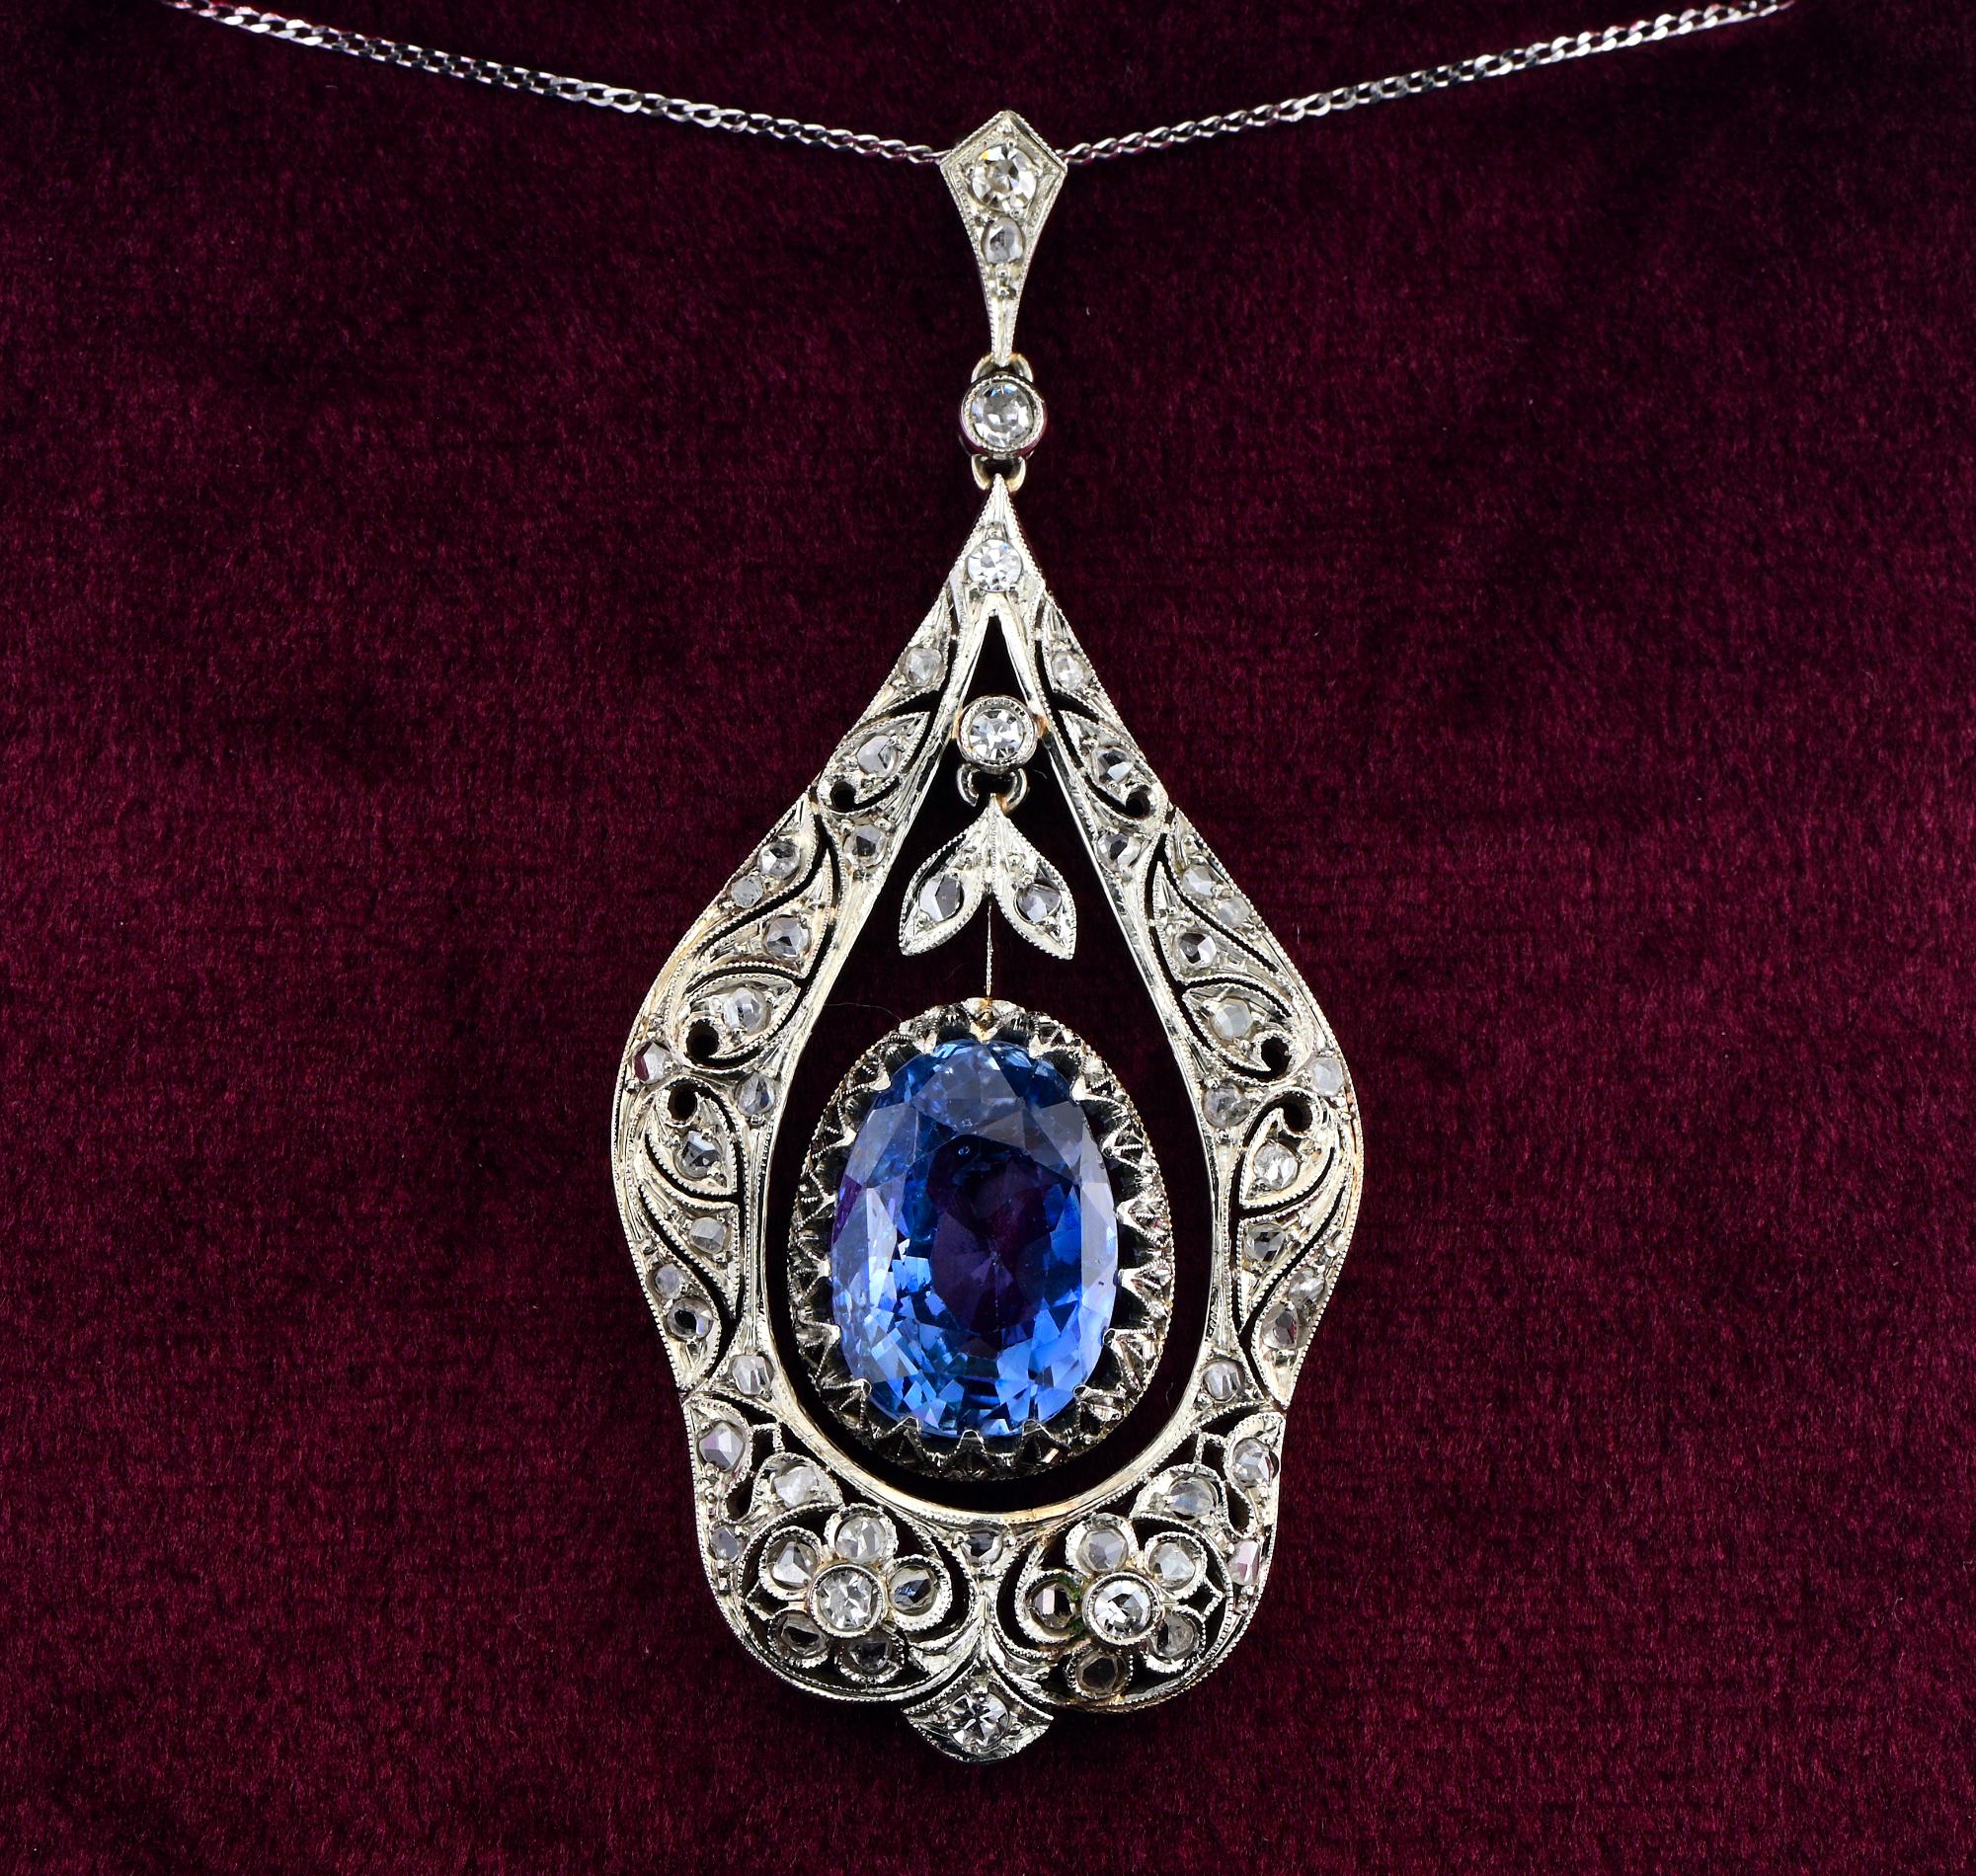 Divine
French for “Beautiful Age,” Belle Époque celebrated a period of prosperity, peace and abundance of creative talent in the jewelry, art and fashion, It was a time of all things elegant and beautiful
This striking pendant is the epitome of